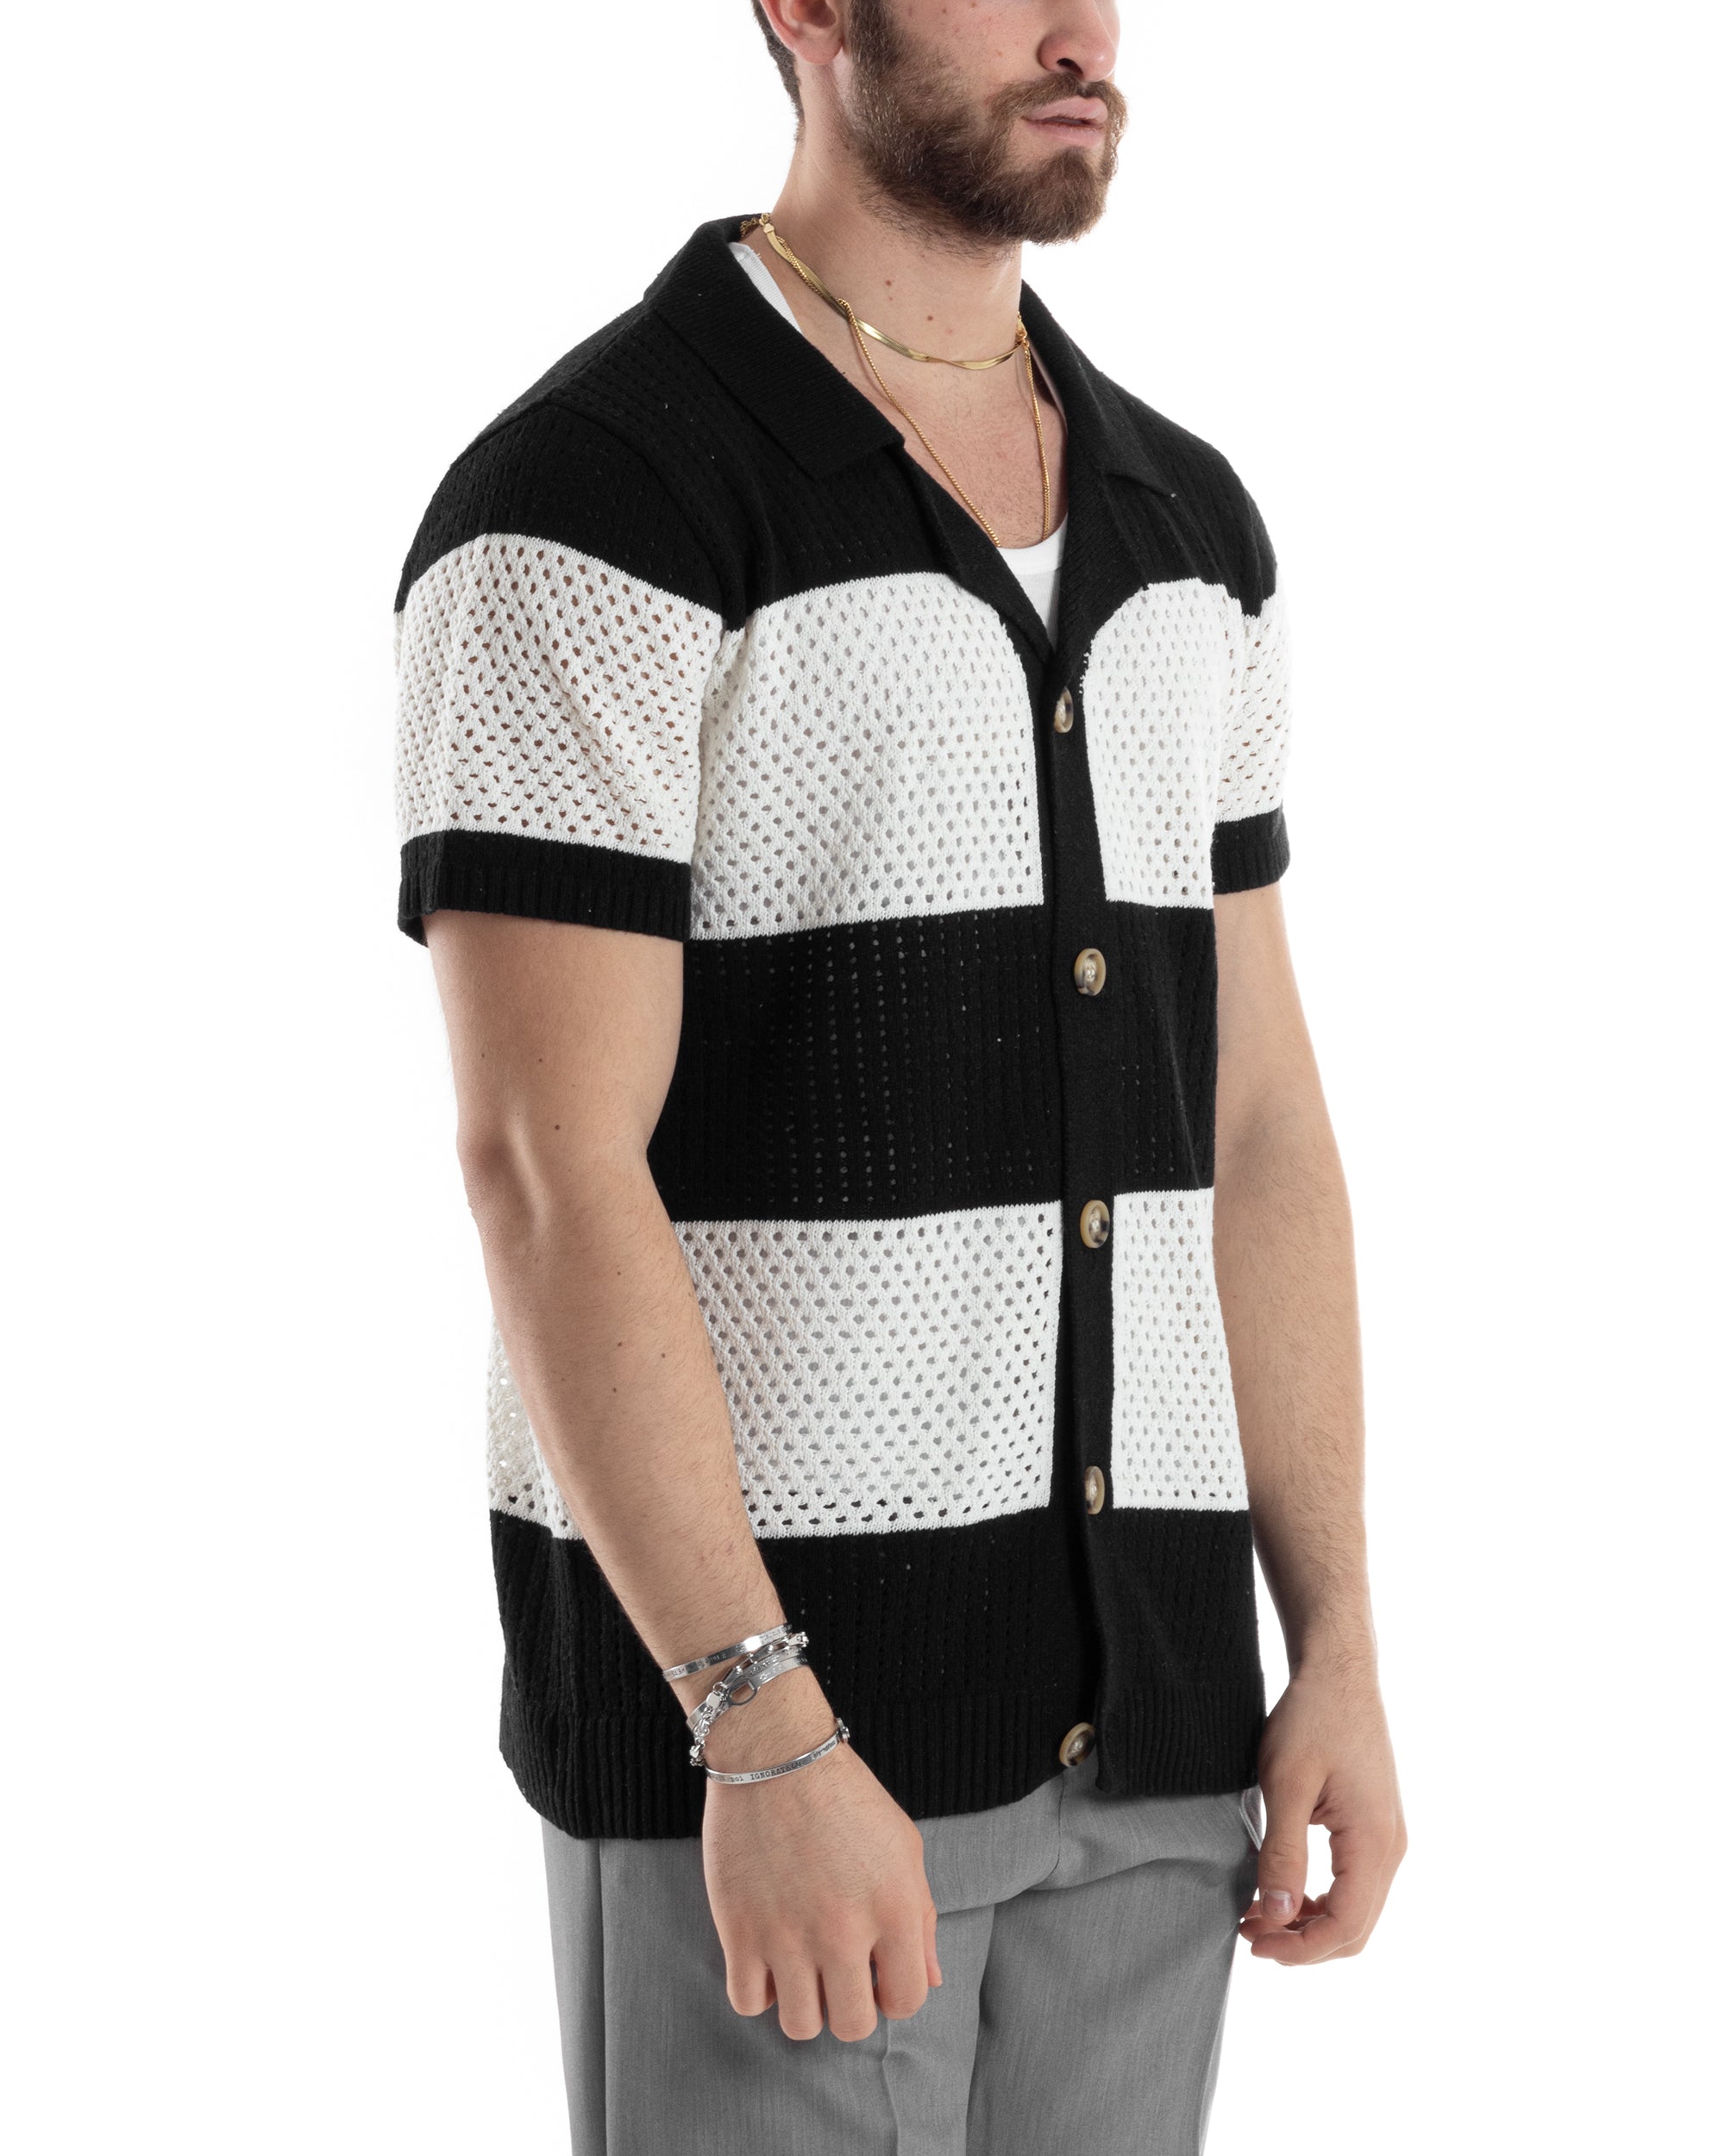 Men's T-shirt Perforated Knit Cardigan With Buttons Solid Color Camel Casual GIOSAL-TS2897A